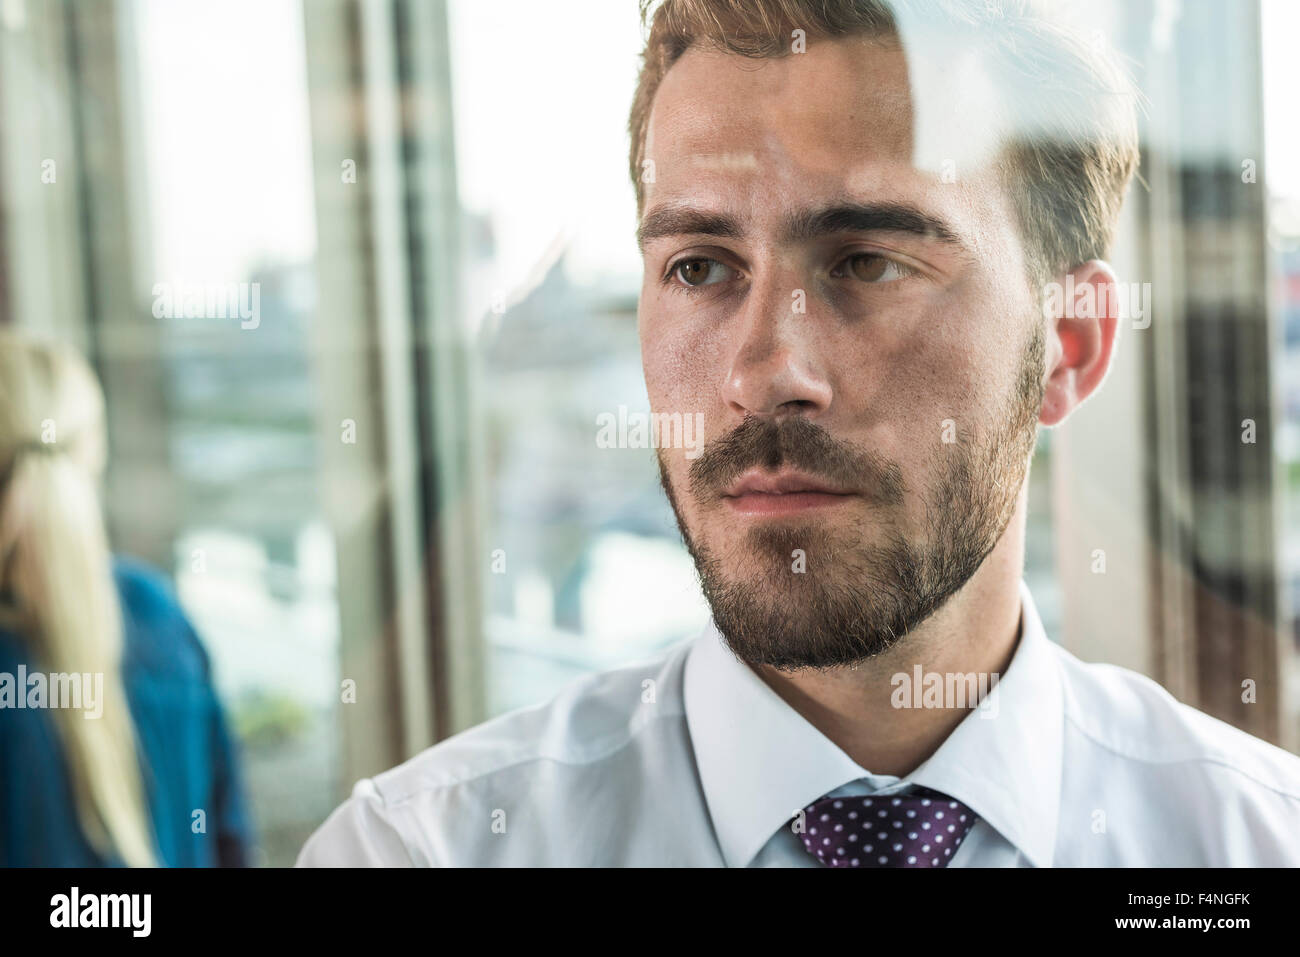 Serious young businessman looking out of window Stock Photo